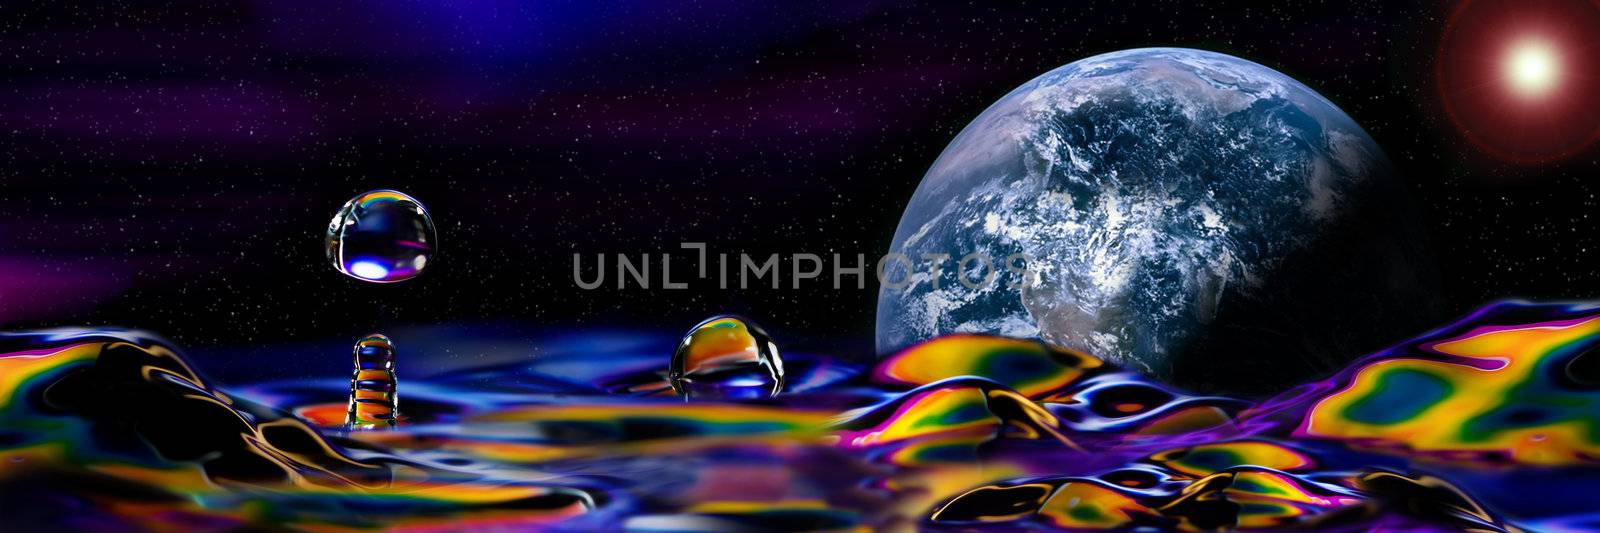 Colorful and Creative Water Drop Creations of a new planet by Coffee999